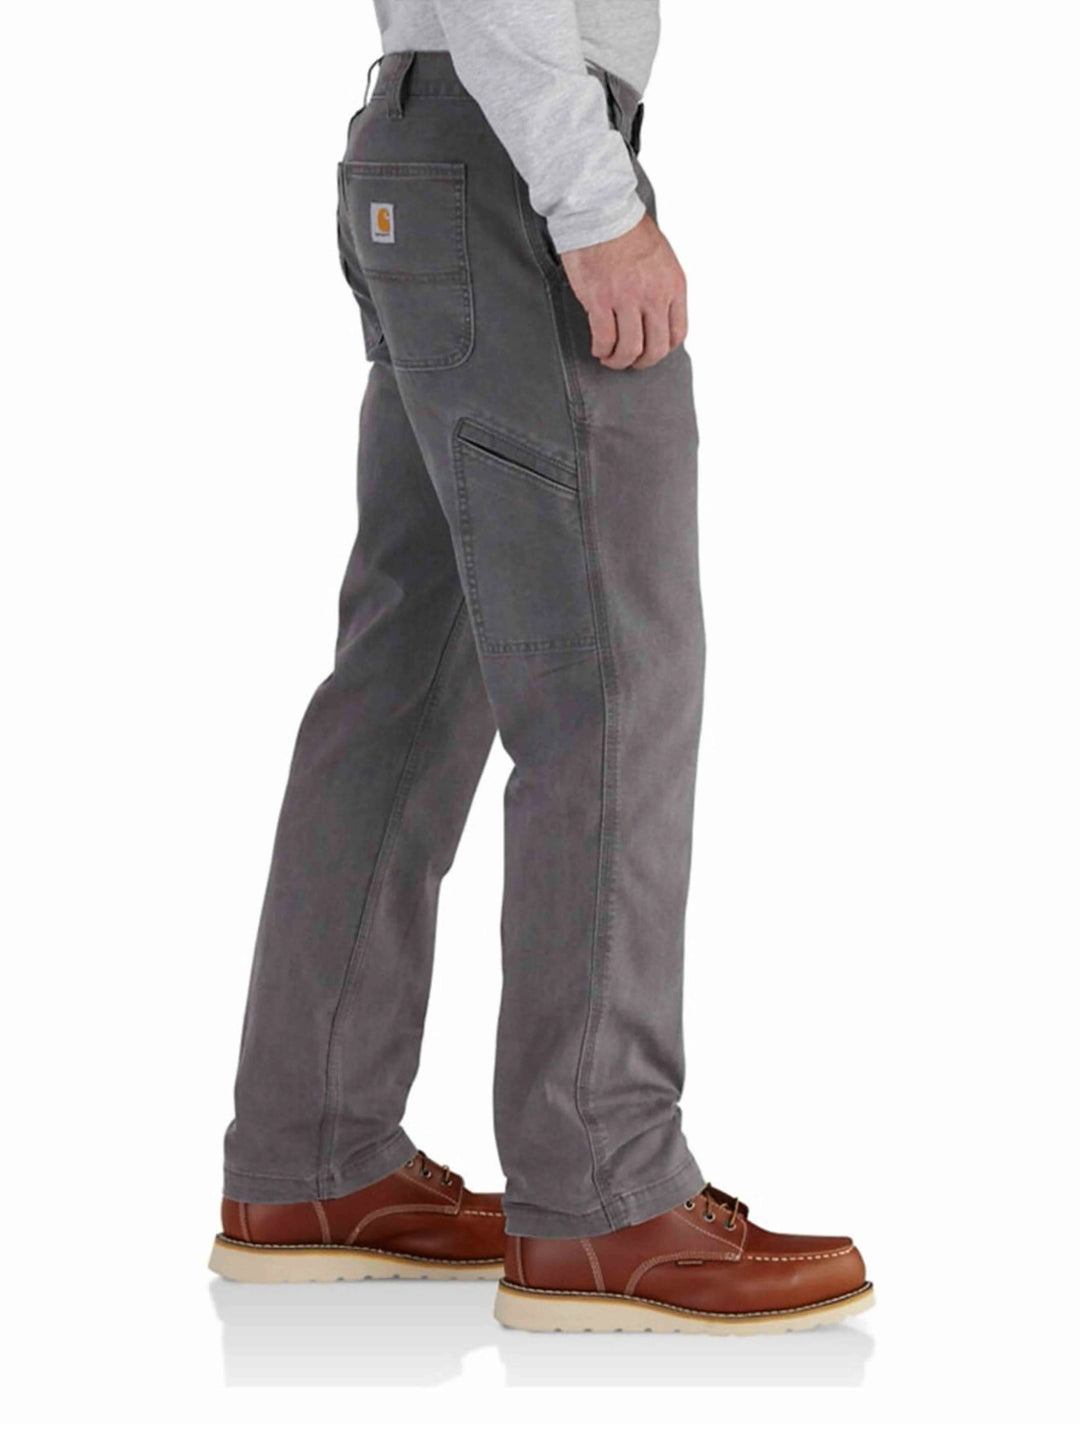 Carhartt Rugged Flex Rigby Relaxed Fit Pant Gravel Prior